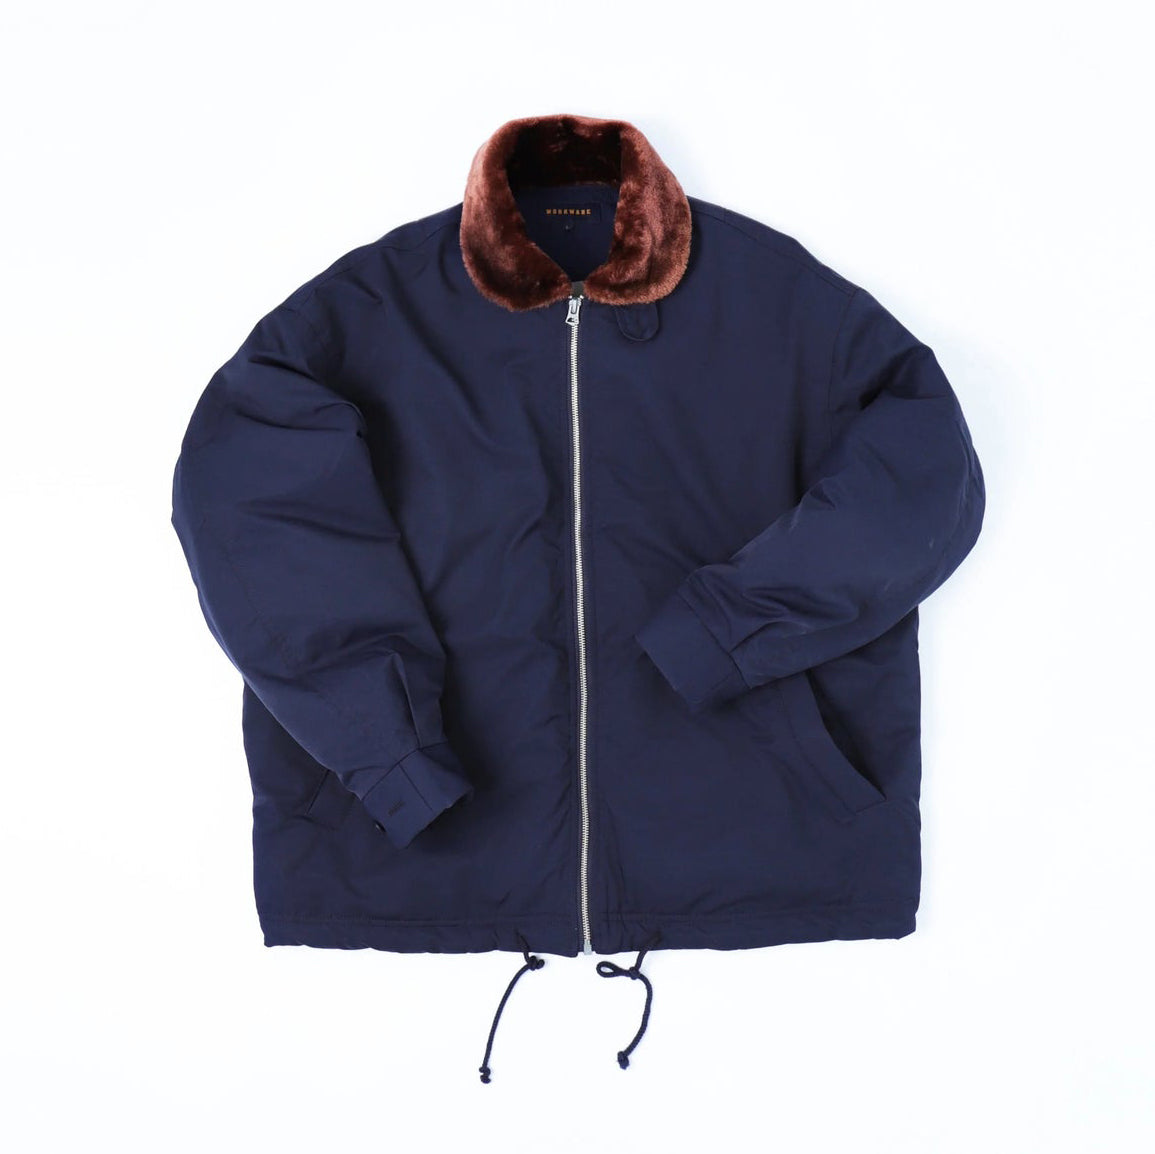 No:#601 | Name:FW23-N1 DECK JACKET | Color:Navy | Size:M/L【WORKWARE】【入荷予定アイテム・入荷連絡可能】